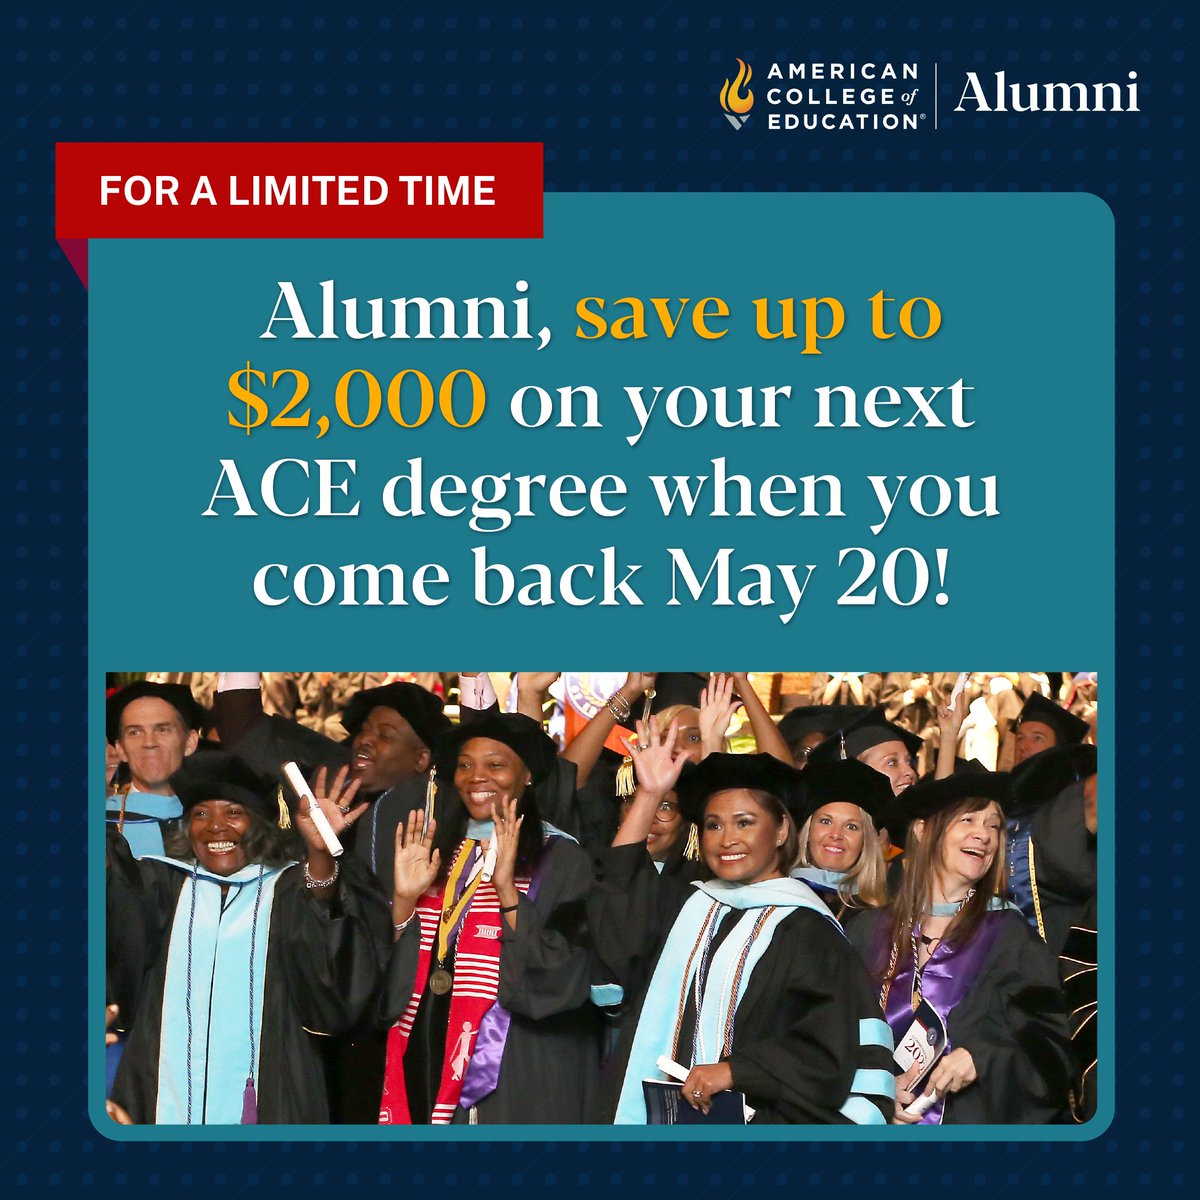 We are doubling our Alumni Continuing Education Grant for those who enroll in our May 20 term. That means if you're an #ACEAlumni and have been thinking about returning for another program, now is the time! Get started: bit.ly/4arE4pw